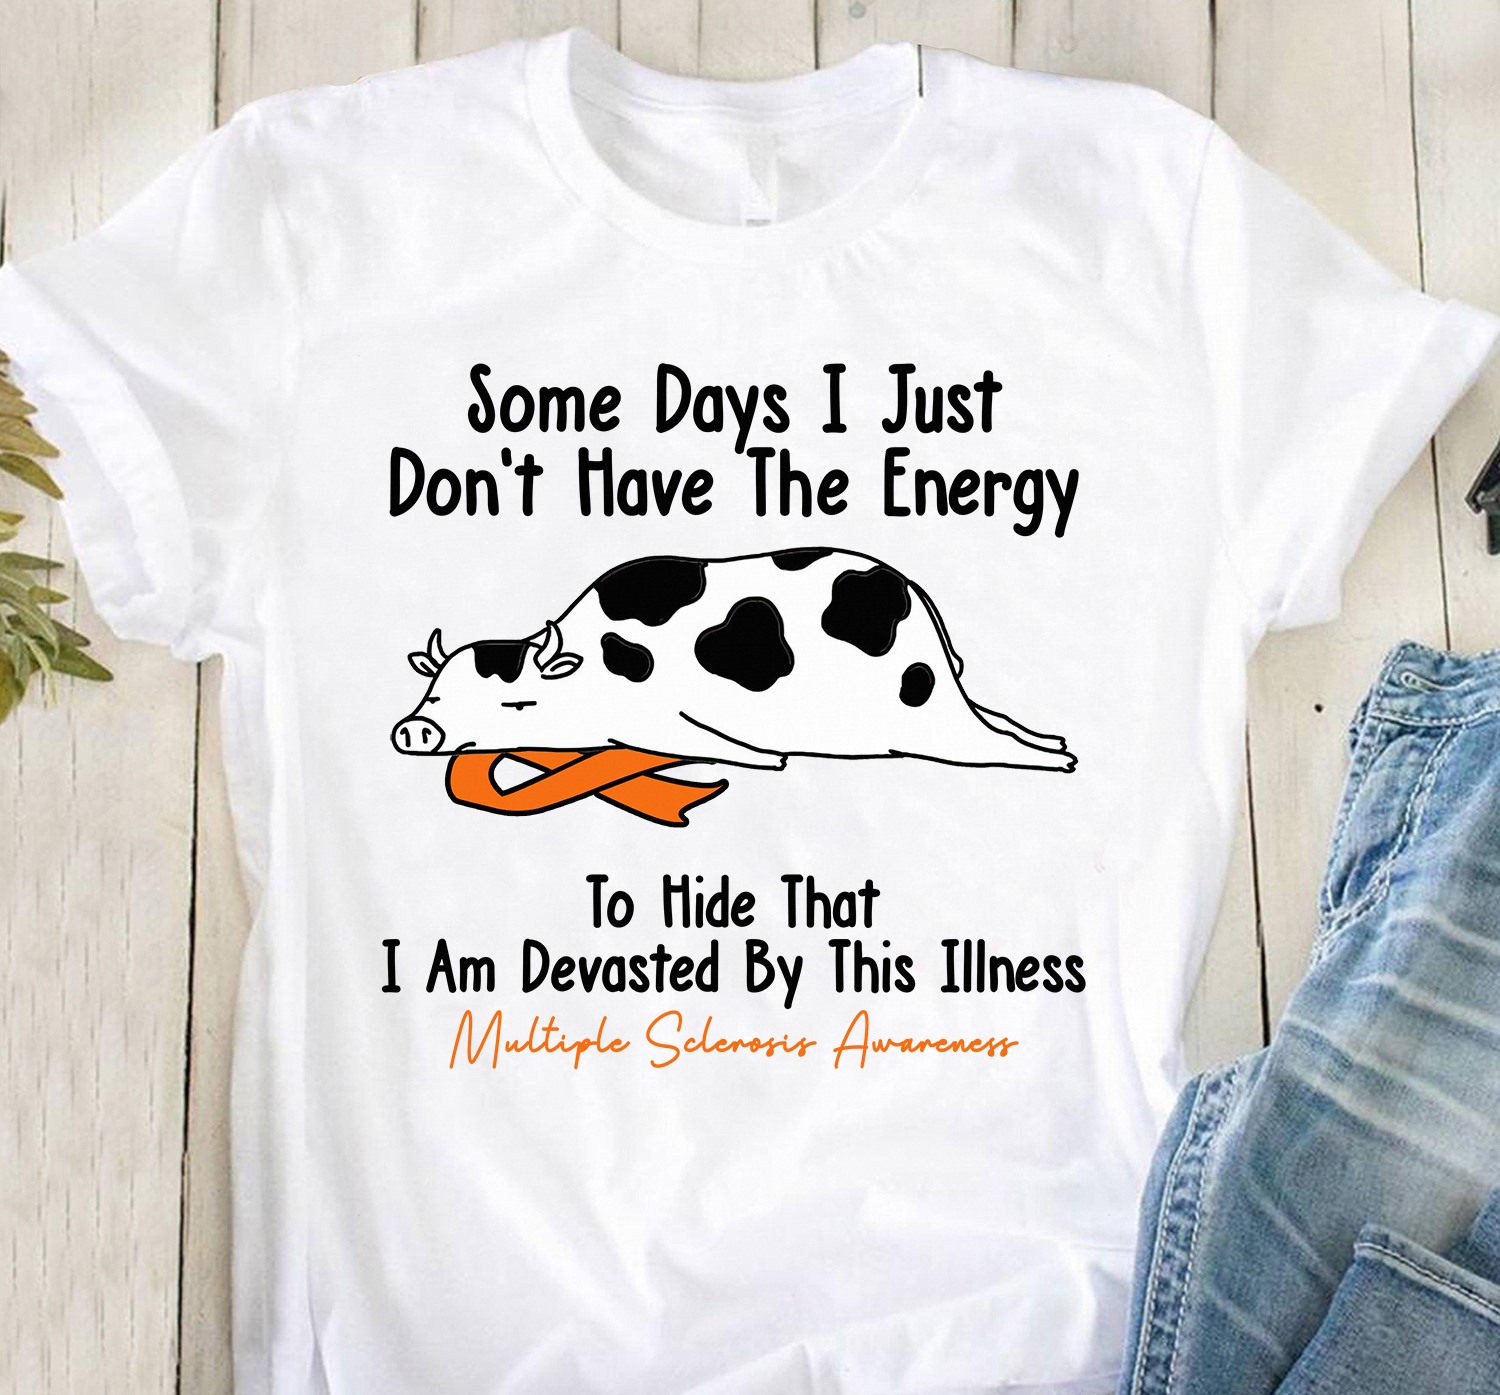 Some days I just don't have the energy to hide that I am devasted by this illness - Multiple sclerosis awareness